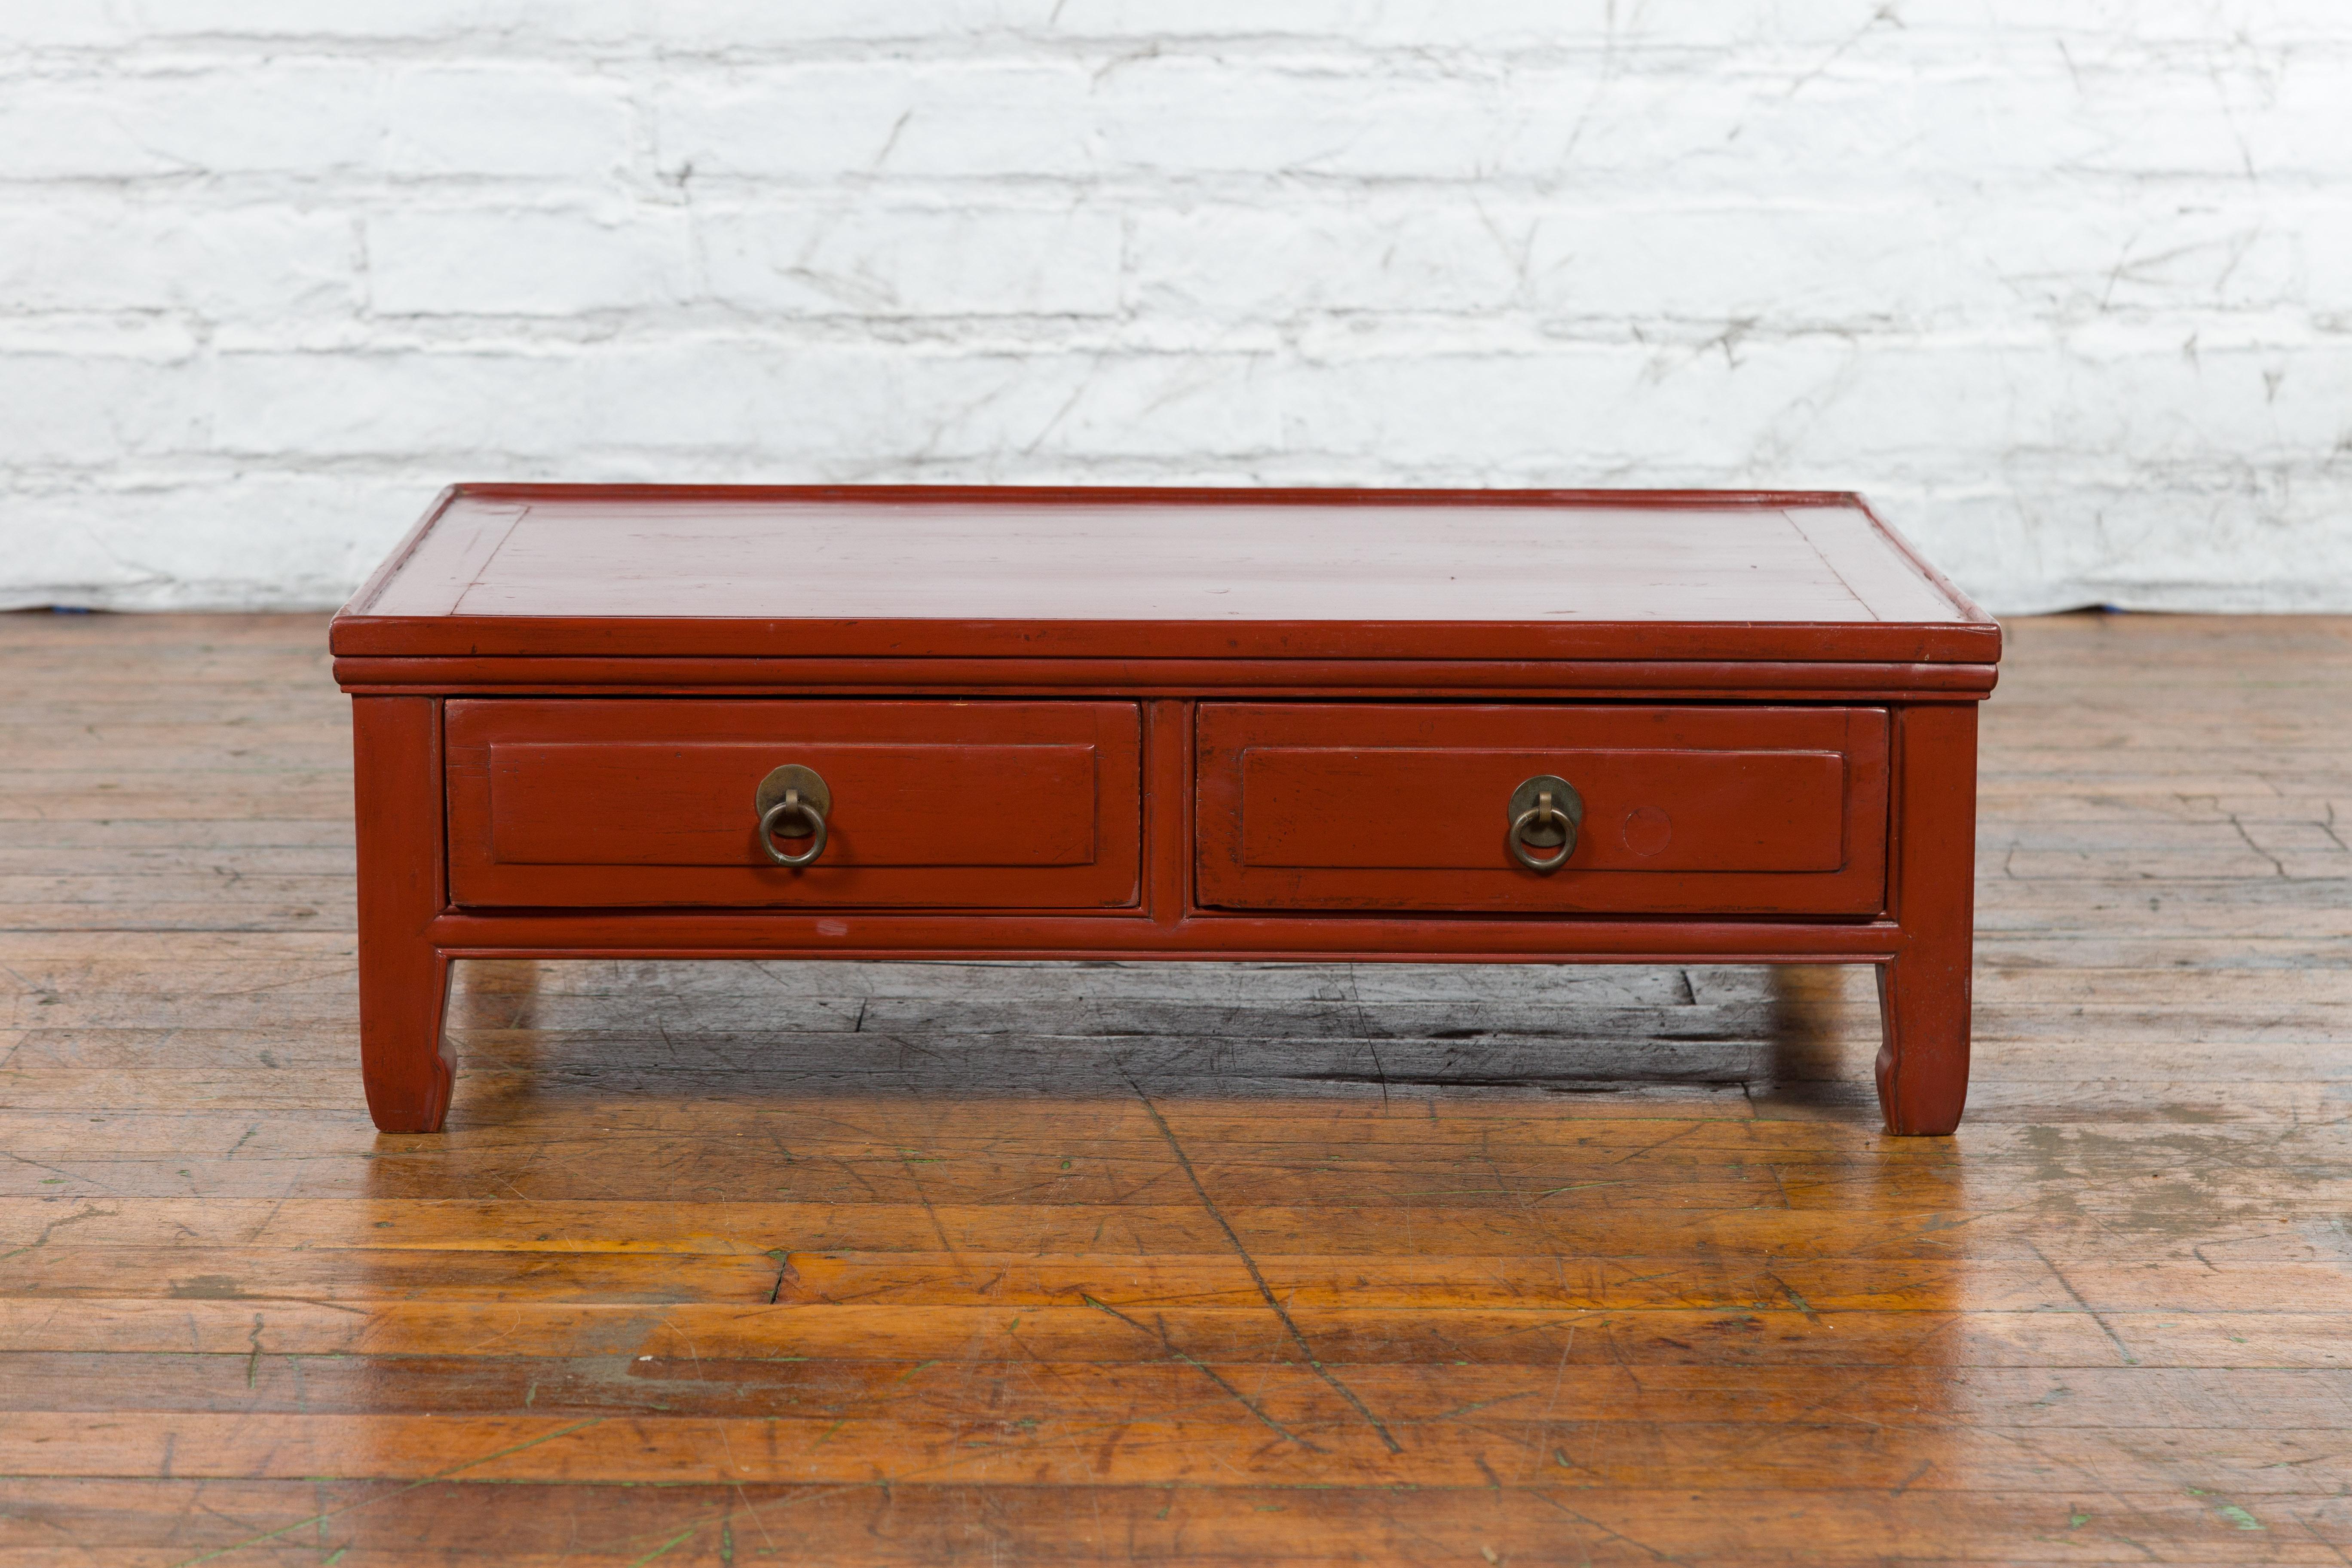 Chinese Qing Dynasty Red Lacquer Low Kang Coffee Table with Drawers and Horse Hoof Feet For Sale